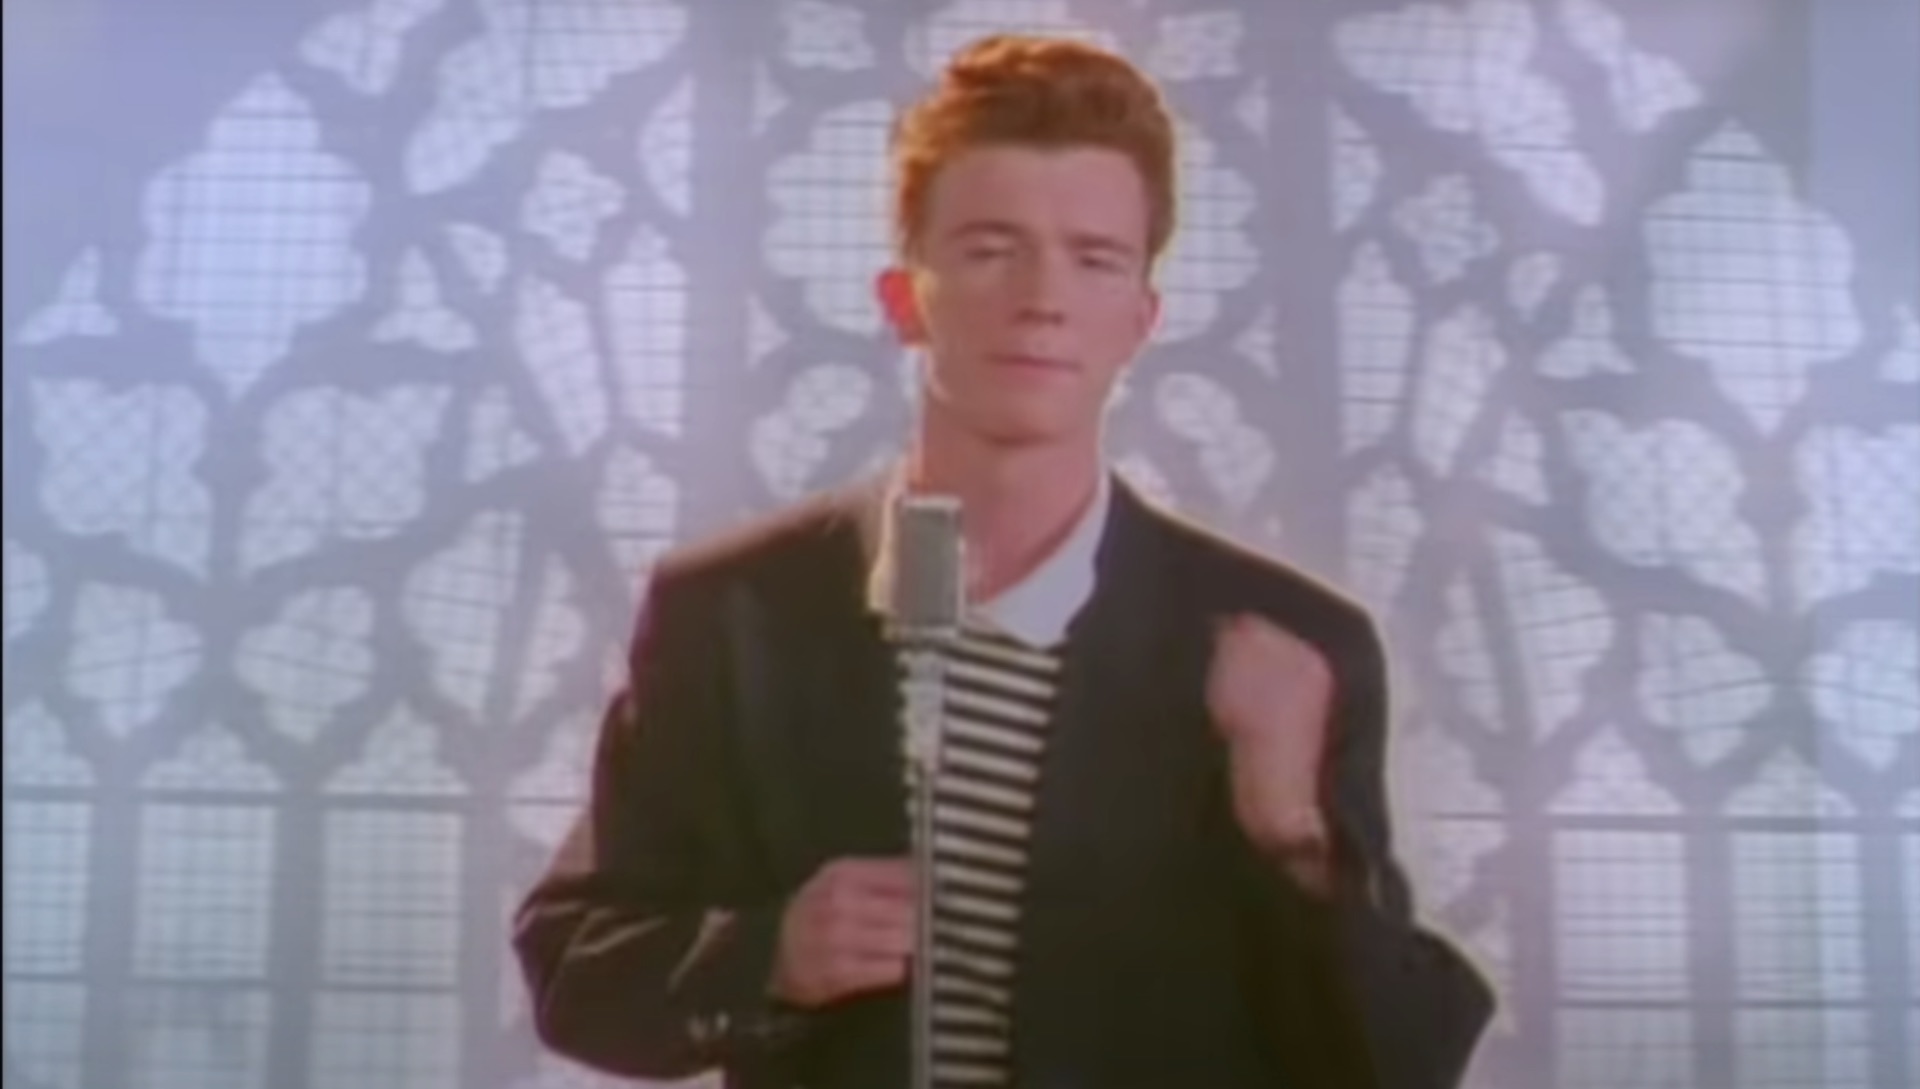 never gonna give you up